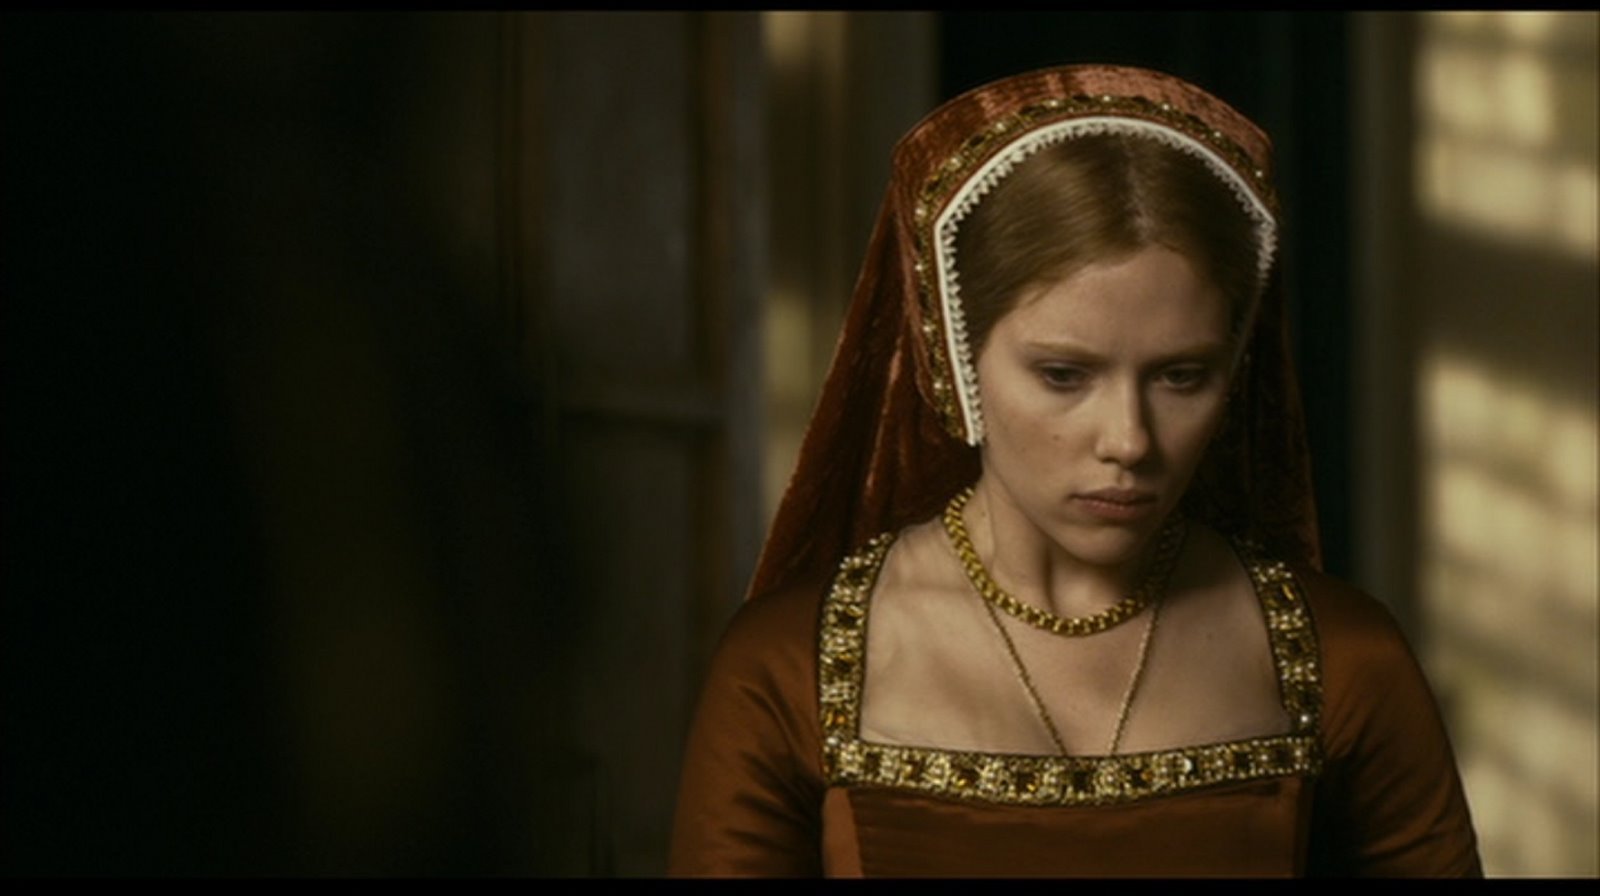 Mary's Red/Rust & Gold Gown - Scarlett Johansson Image (21609693) - Fanpop1600 x 896